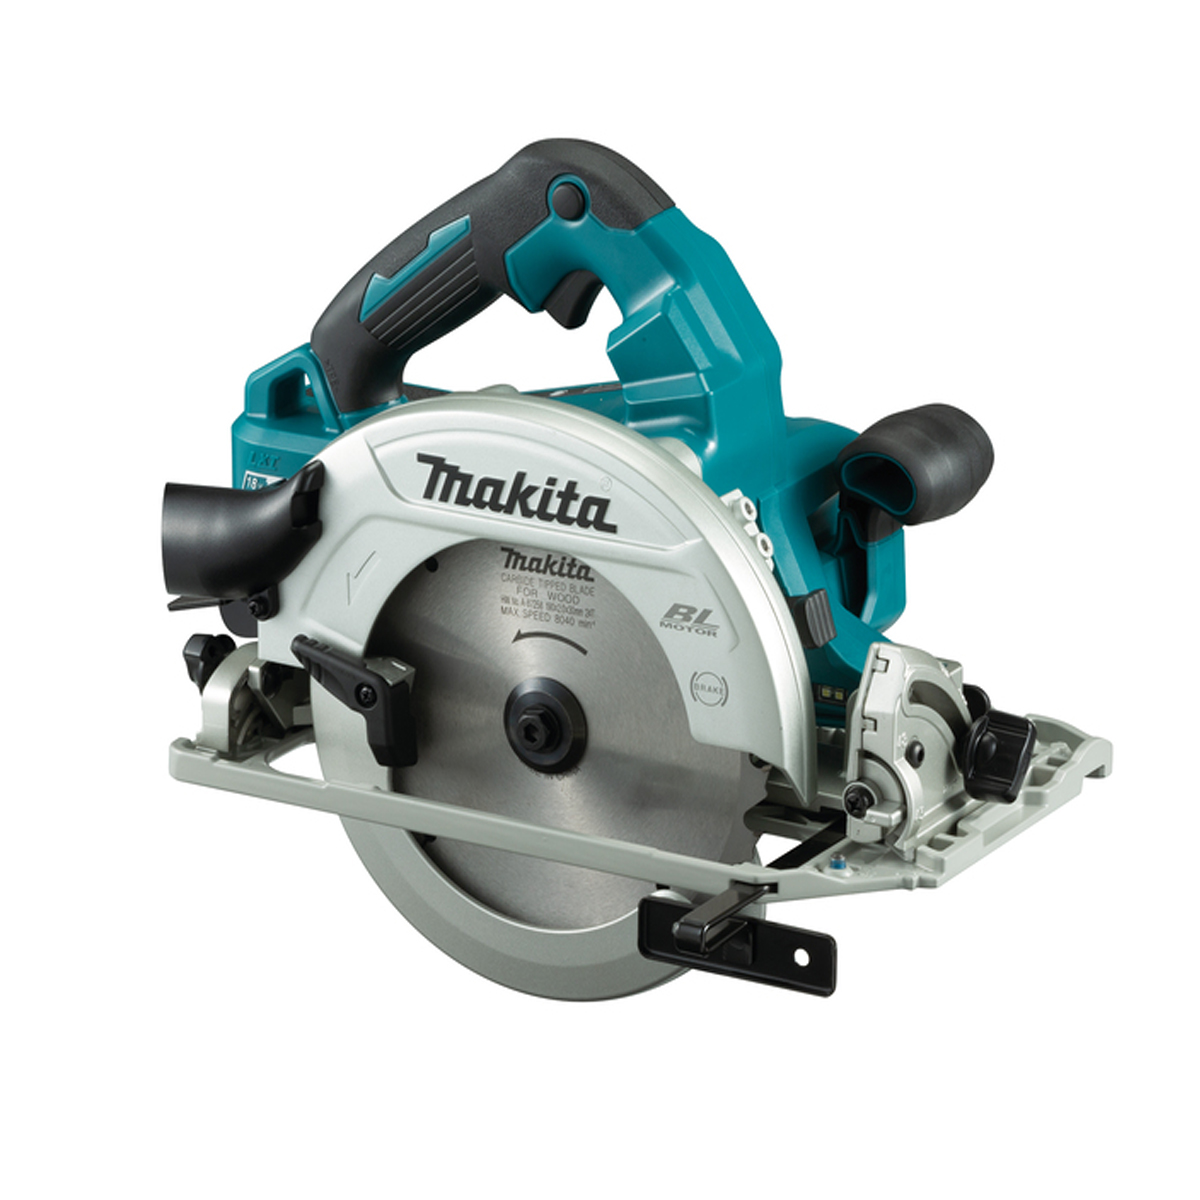 Makita DHS782 36V (Twin 18V) LXT 190mm Brushless Circular Saw - Body Only